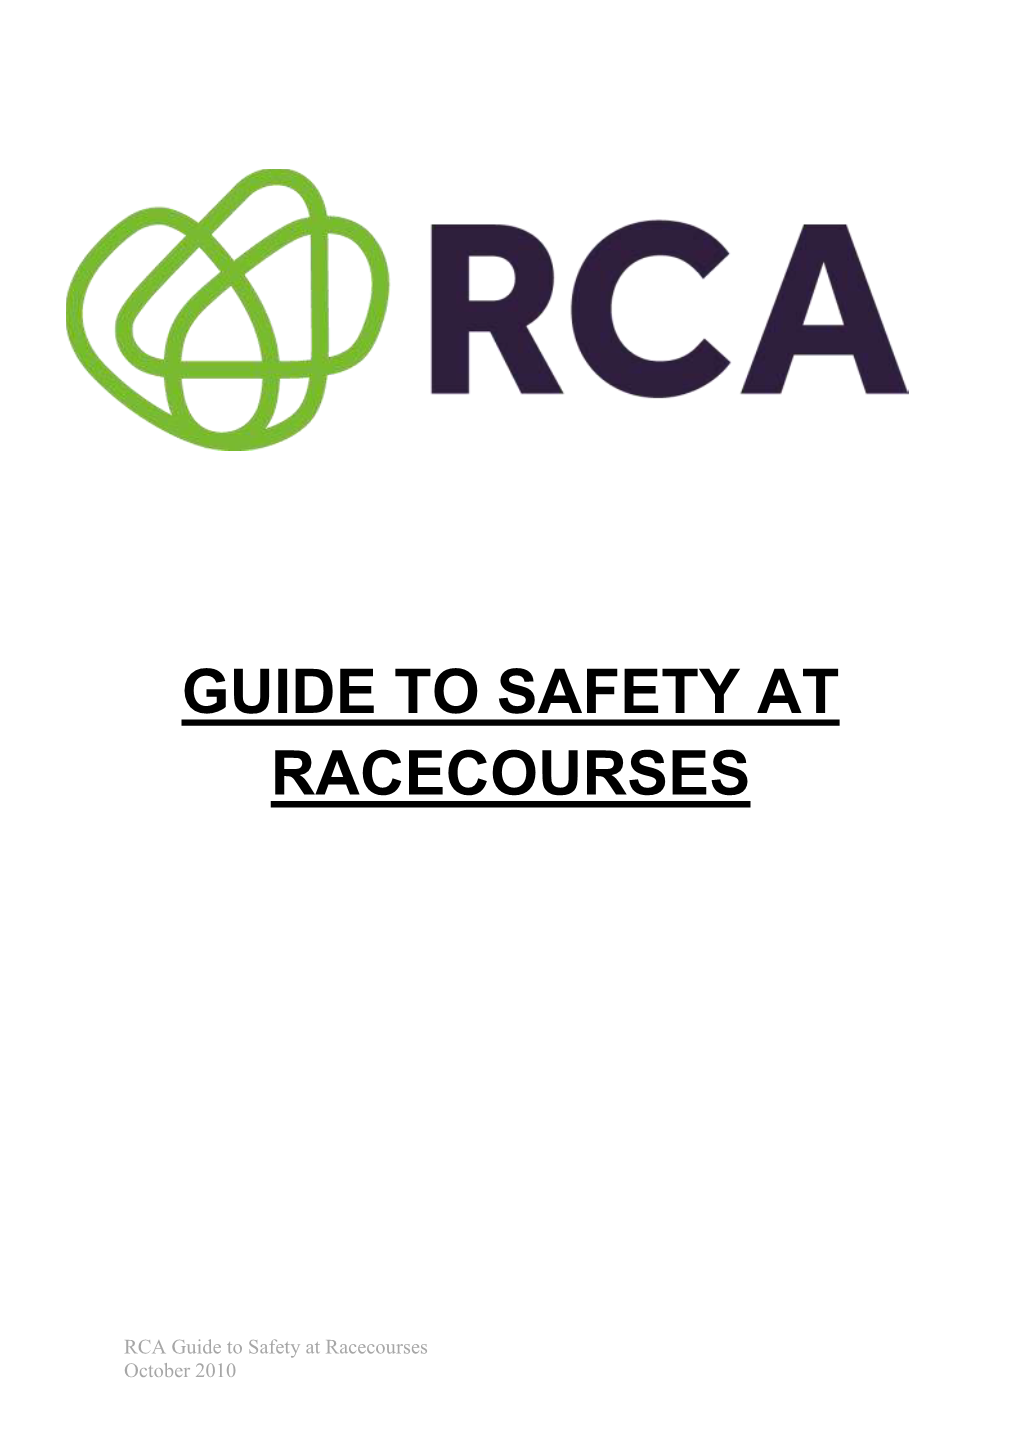 Guide to Safety at Racecourses